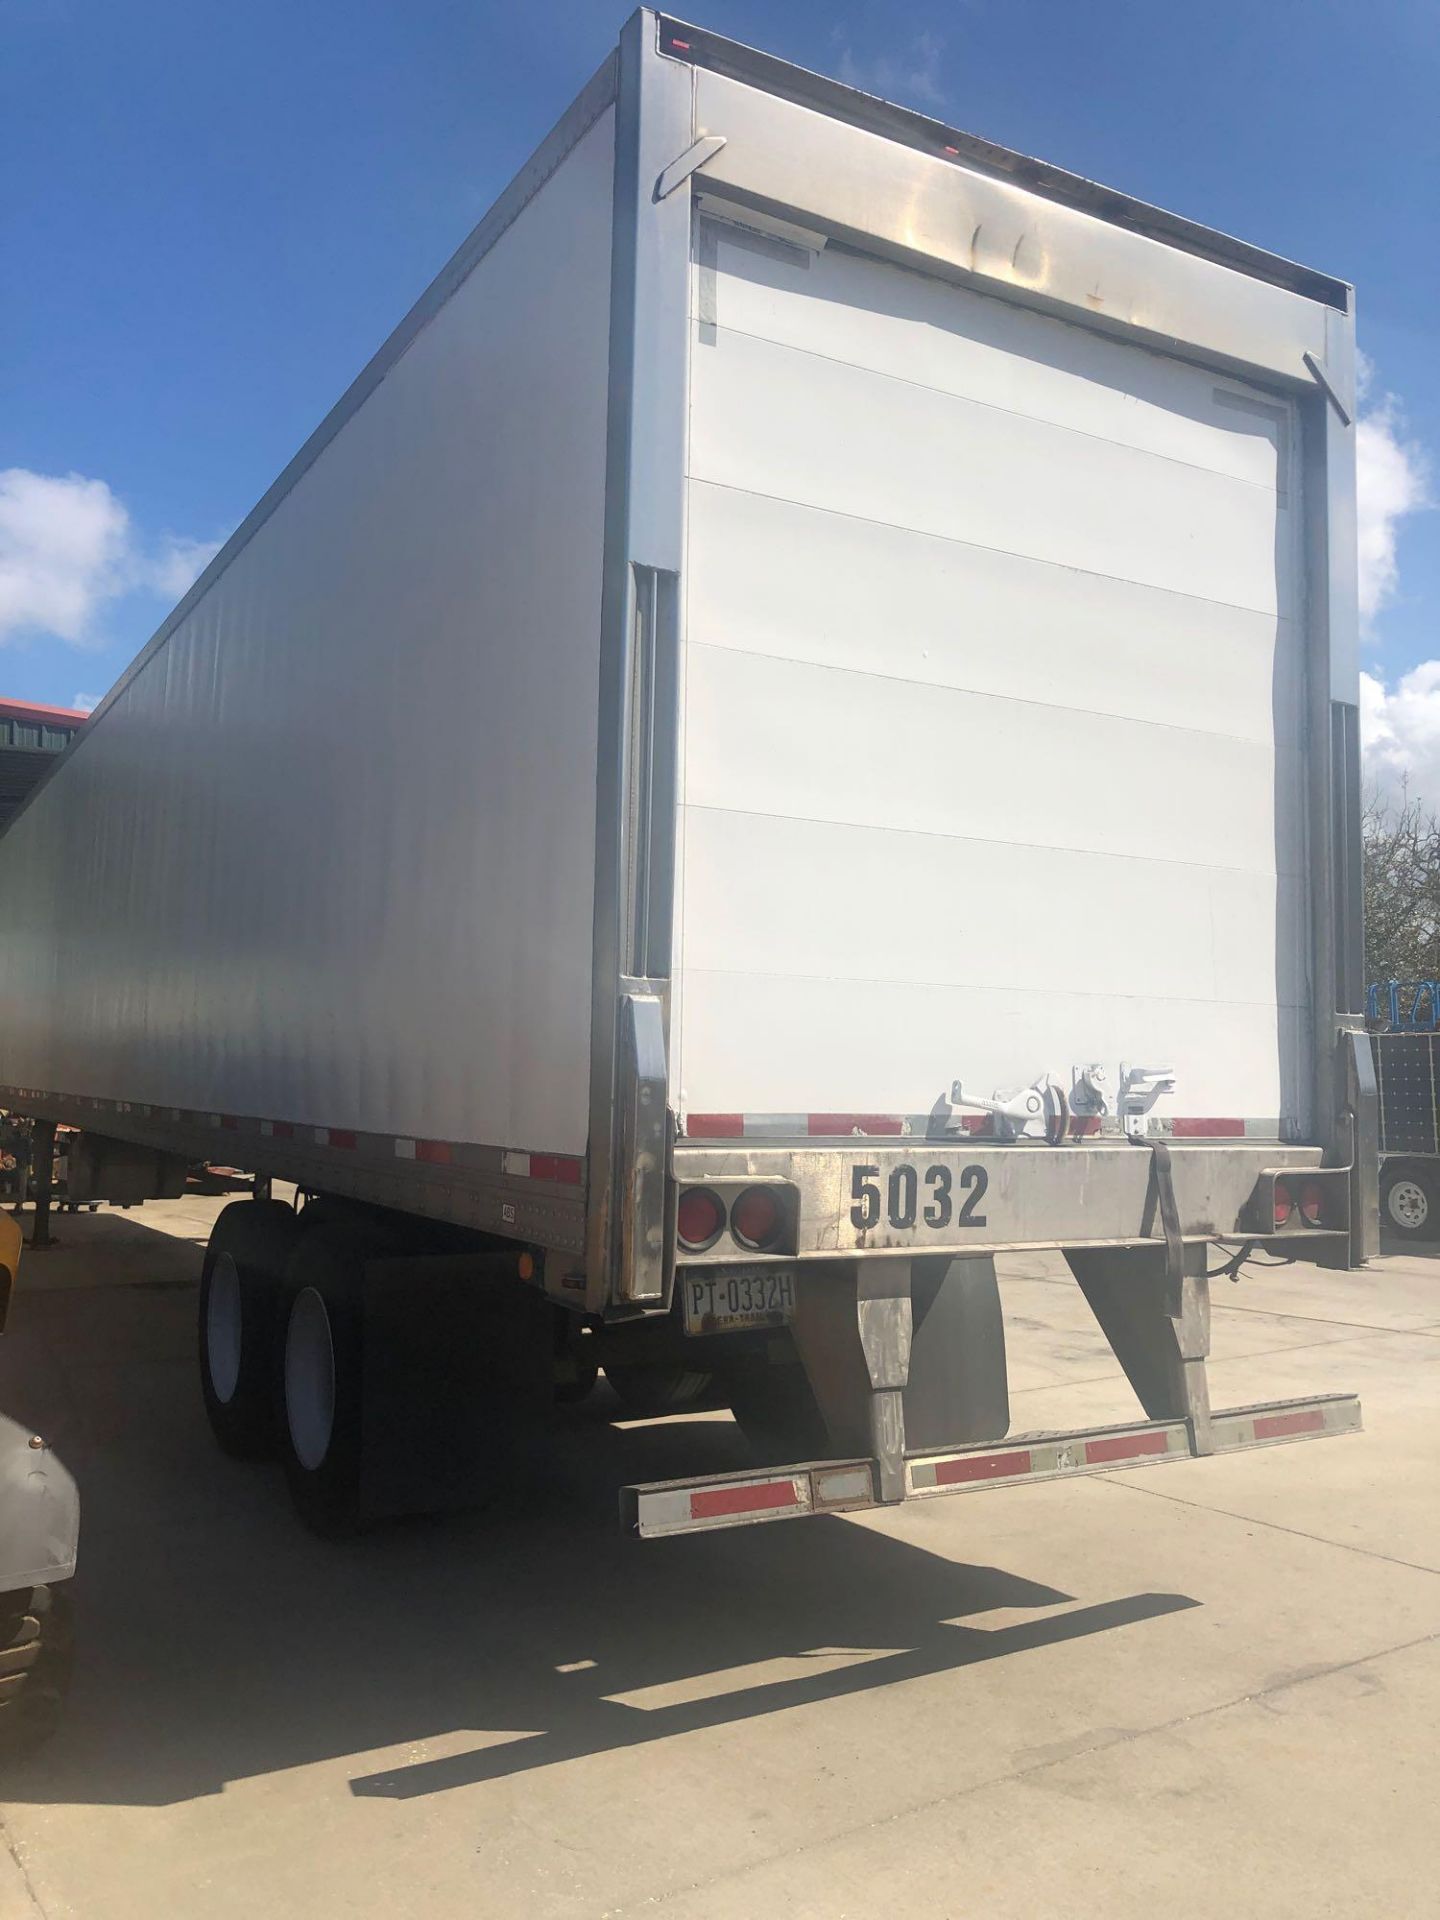 2005 THERMO KING UTILITY REEFER TRAILER, 65,000 LB GVWR, REEFER RUNS - Image 3 of 8